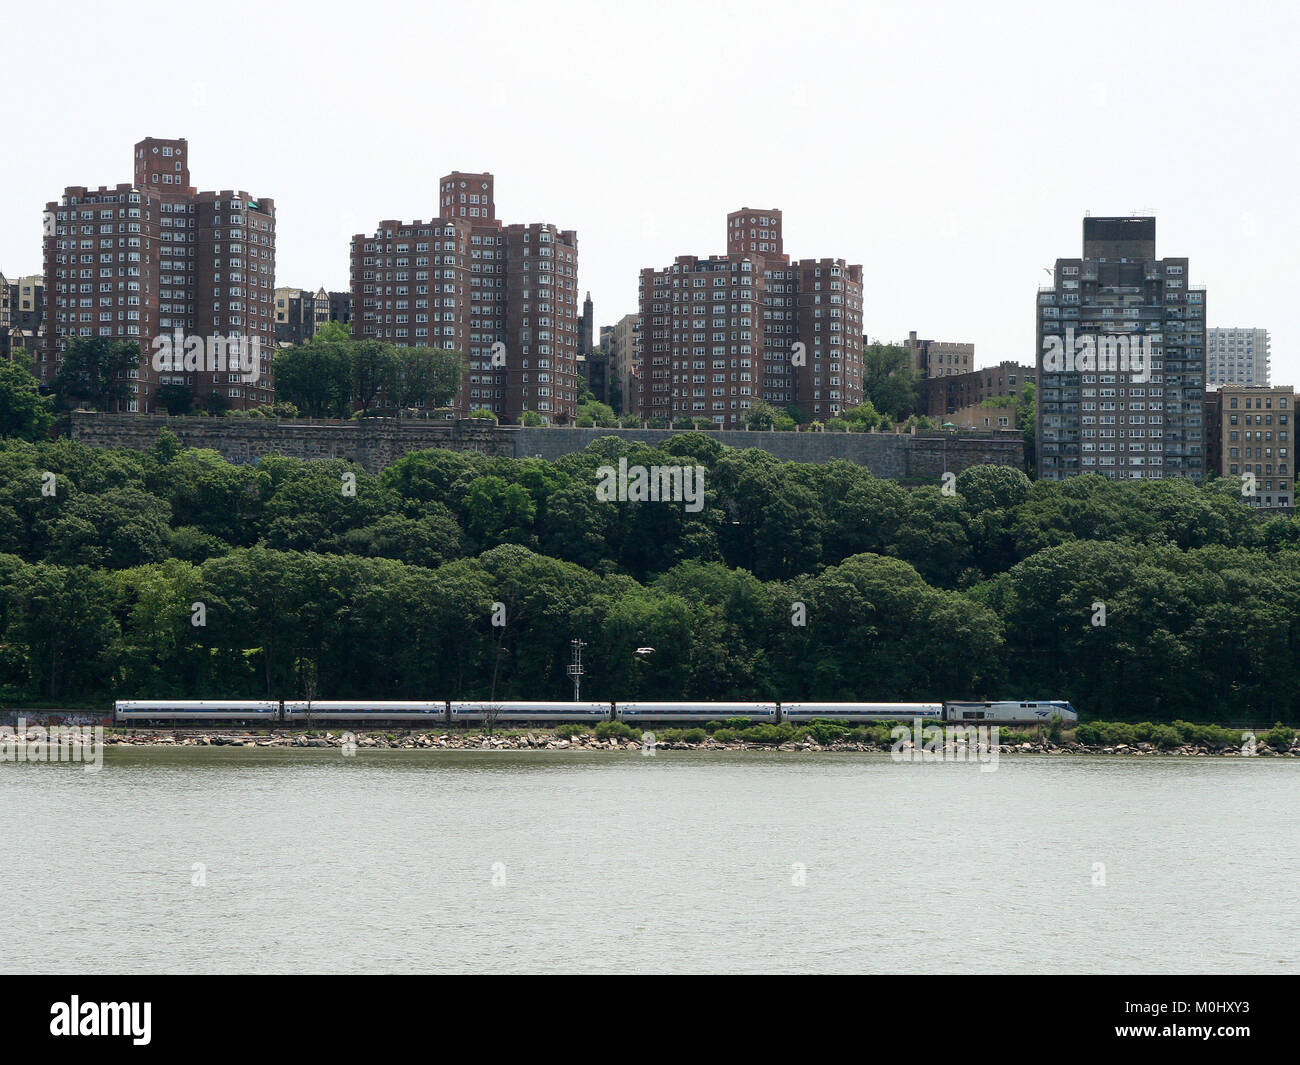 Apartment buildings in Washington Heights, Upper Manhattan on the Hudson River, New York City, New York State, USA. Stock Photo